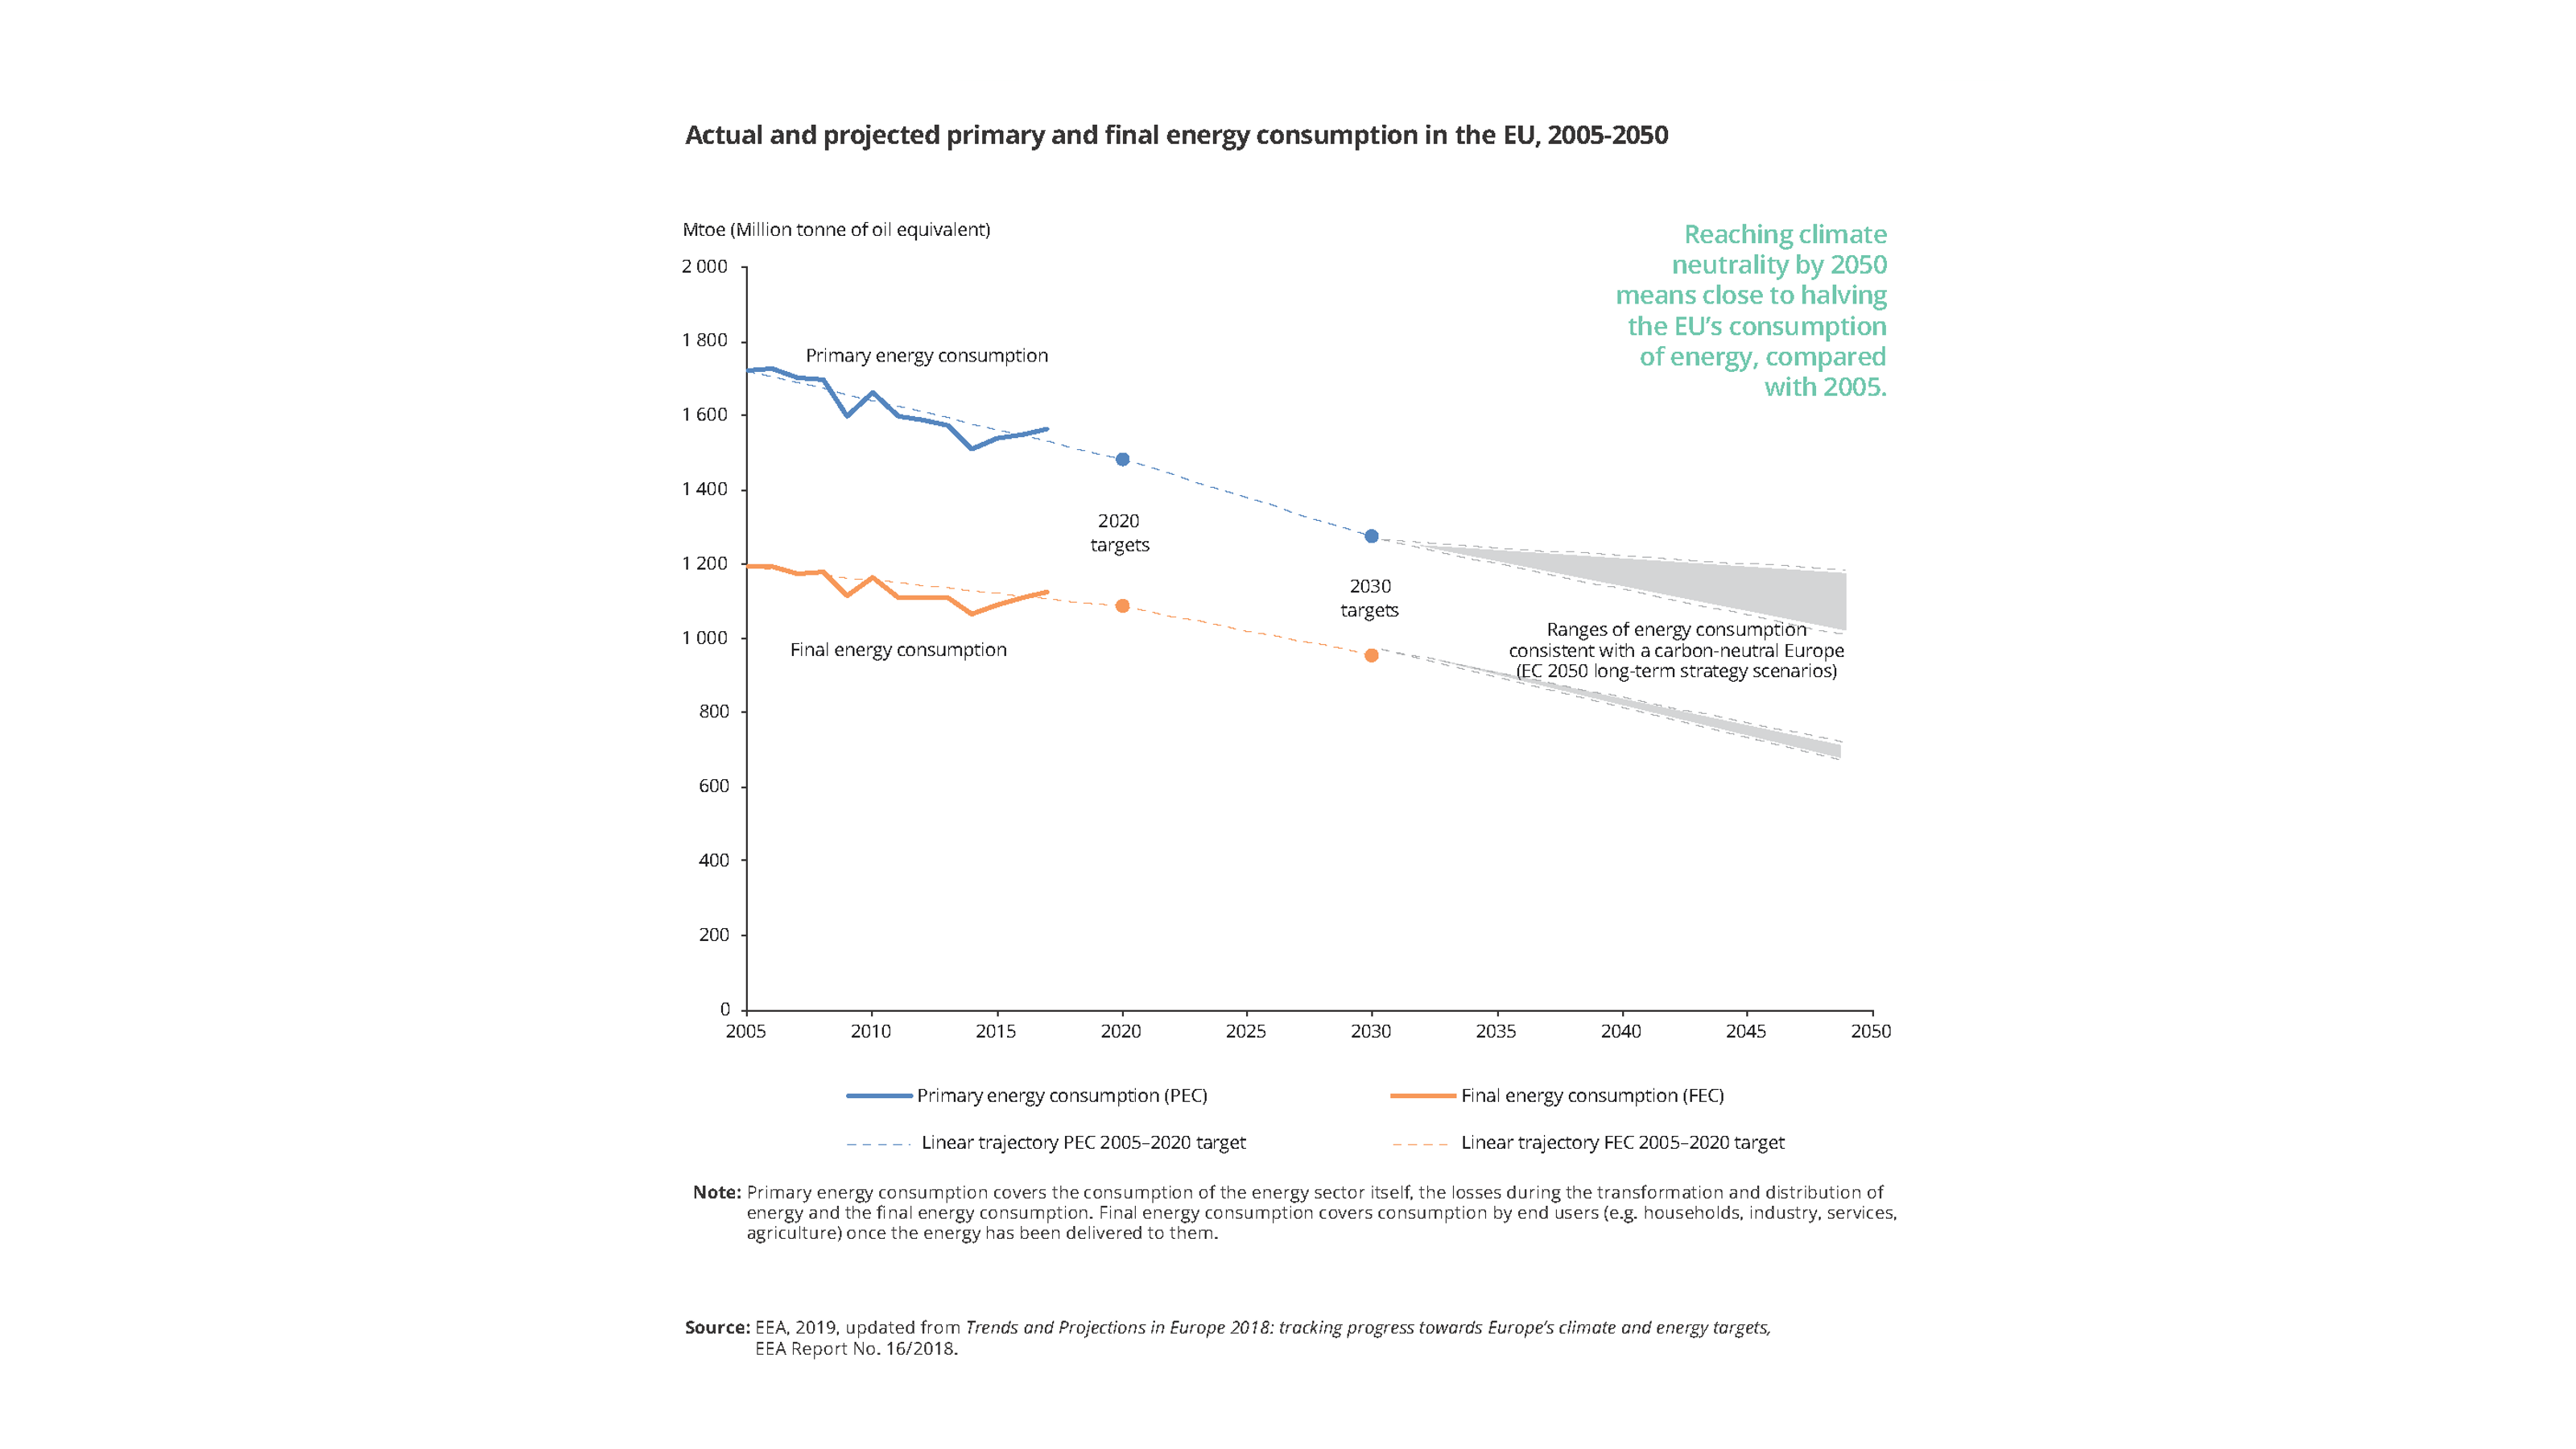 Primary and final energy consumption in the EU, 2005-2017, 2020 and 2030 targets and 2050 scenario ranges for a climate neutral Europe according to the EU strategic long-term vision for 2050